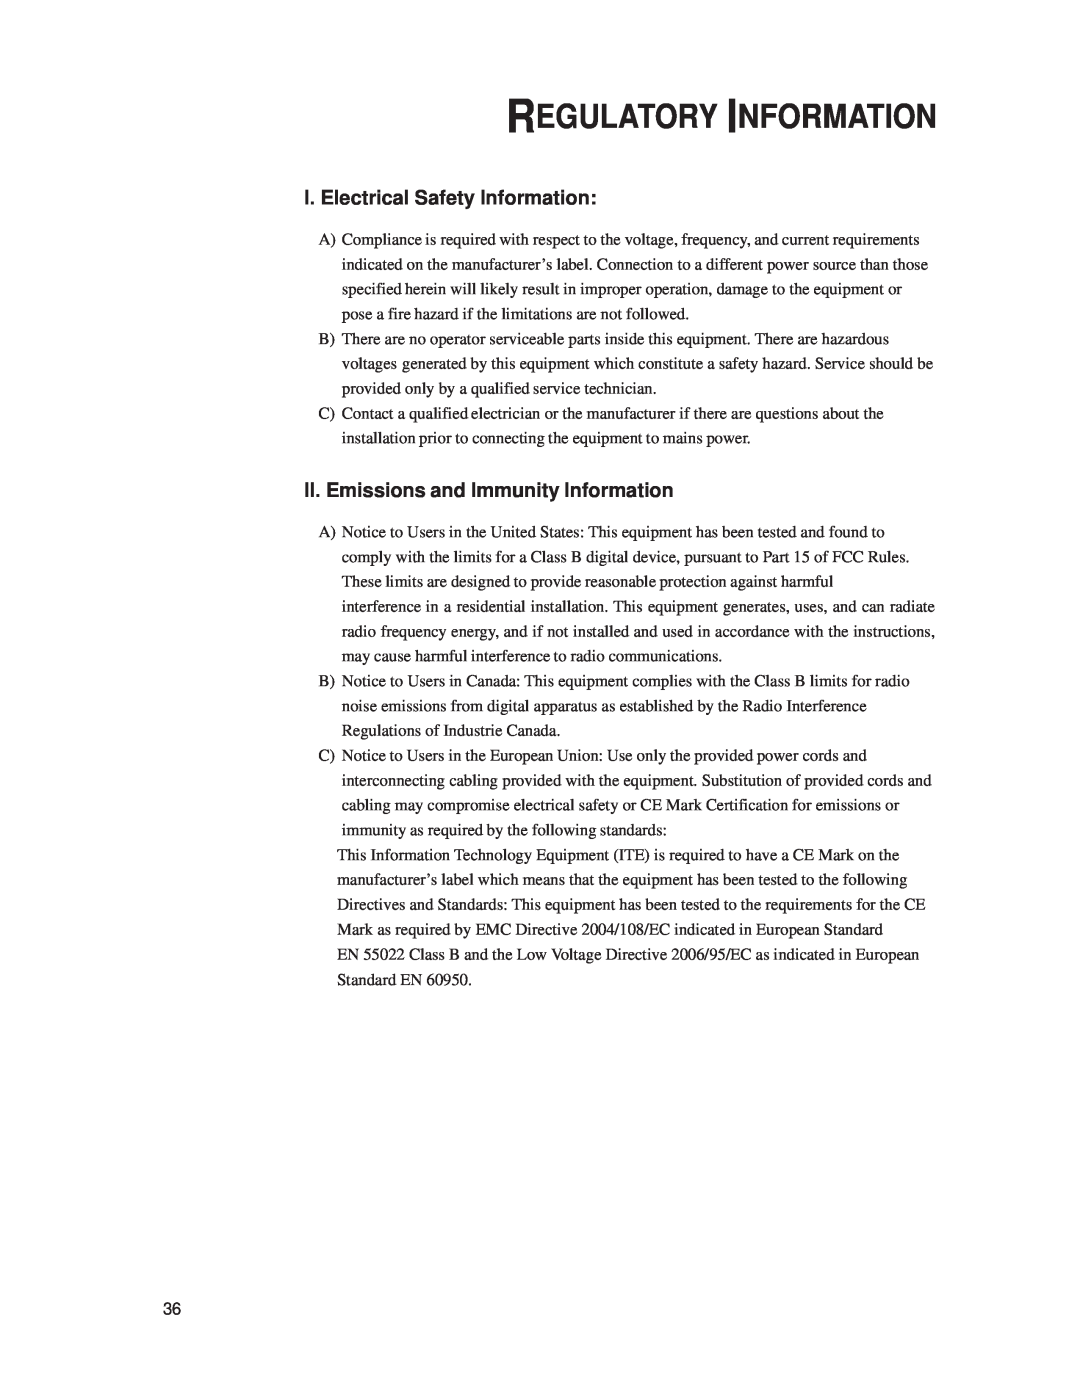 Elo TouchSystems 1919L Regulatory Information, I. Electrical Safety Information, II. Emissions and Immunity Information 